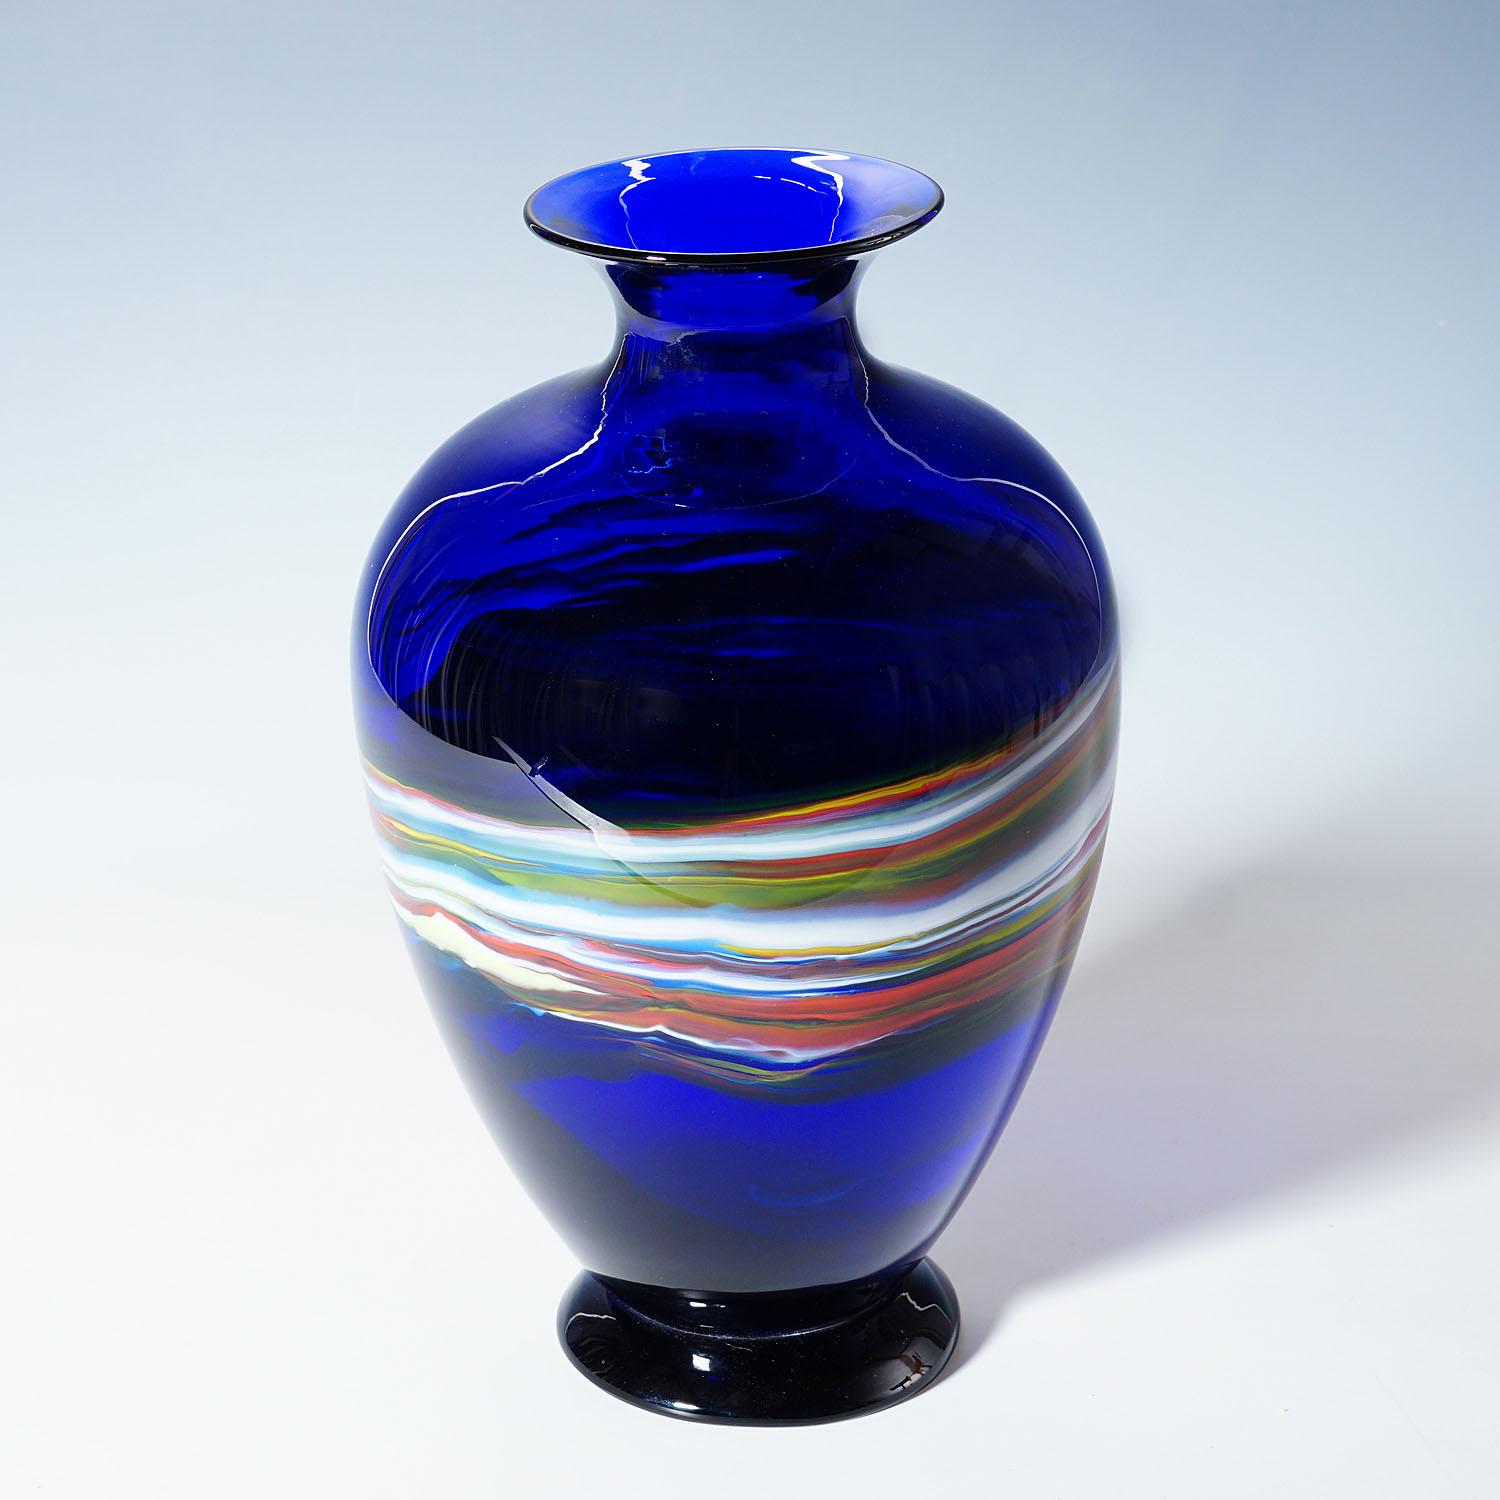 20th Century Art Glass Vase by Gianni Versage for Vetreria Archimede Seguso ca. 1990s For Sale